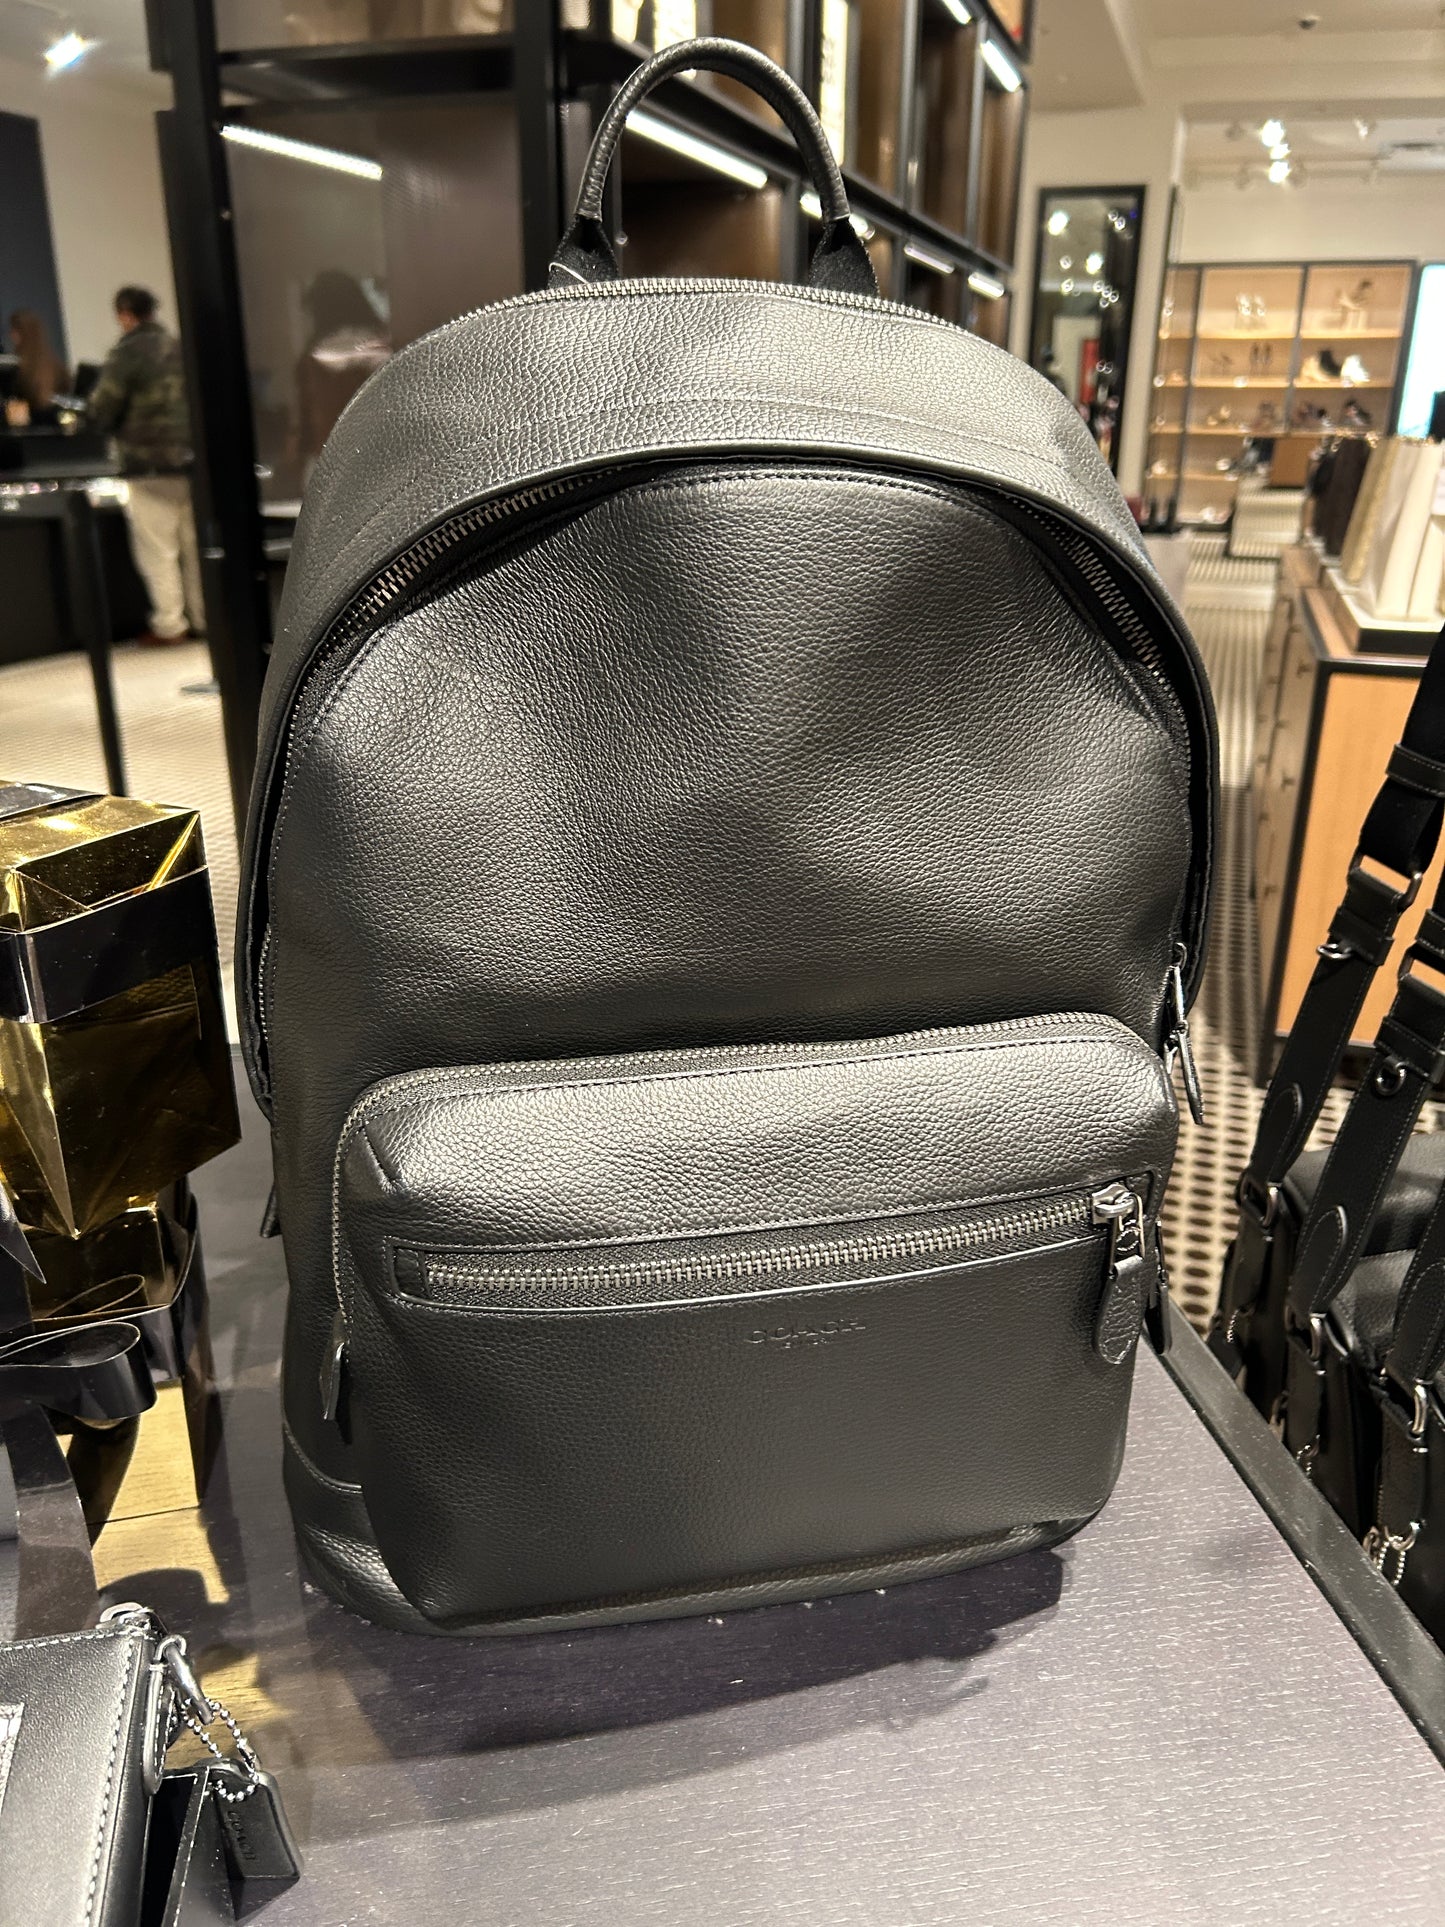 Coach Men West Backpack In Leather Black